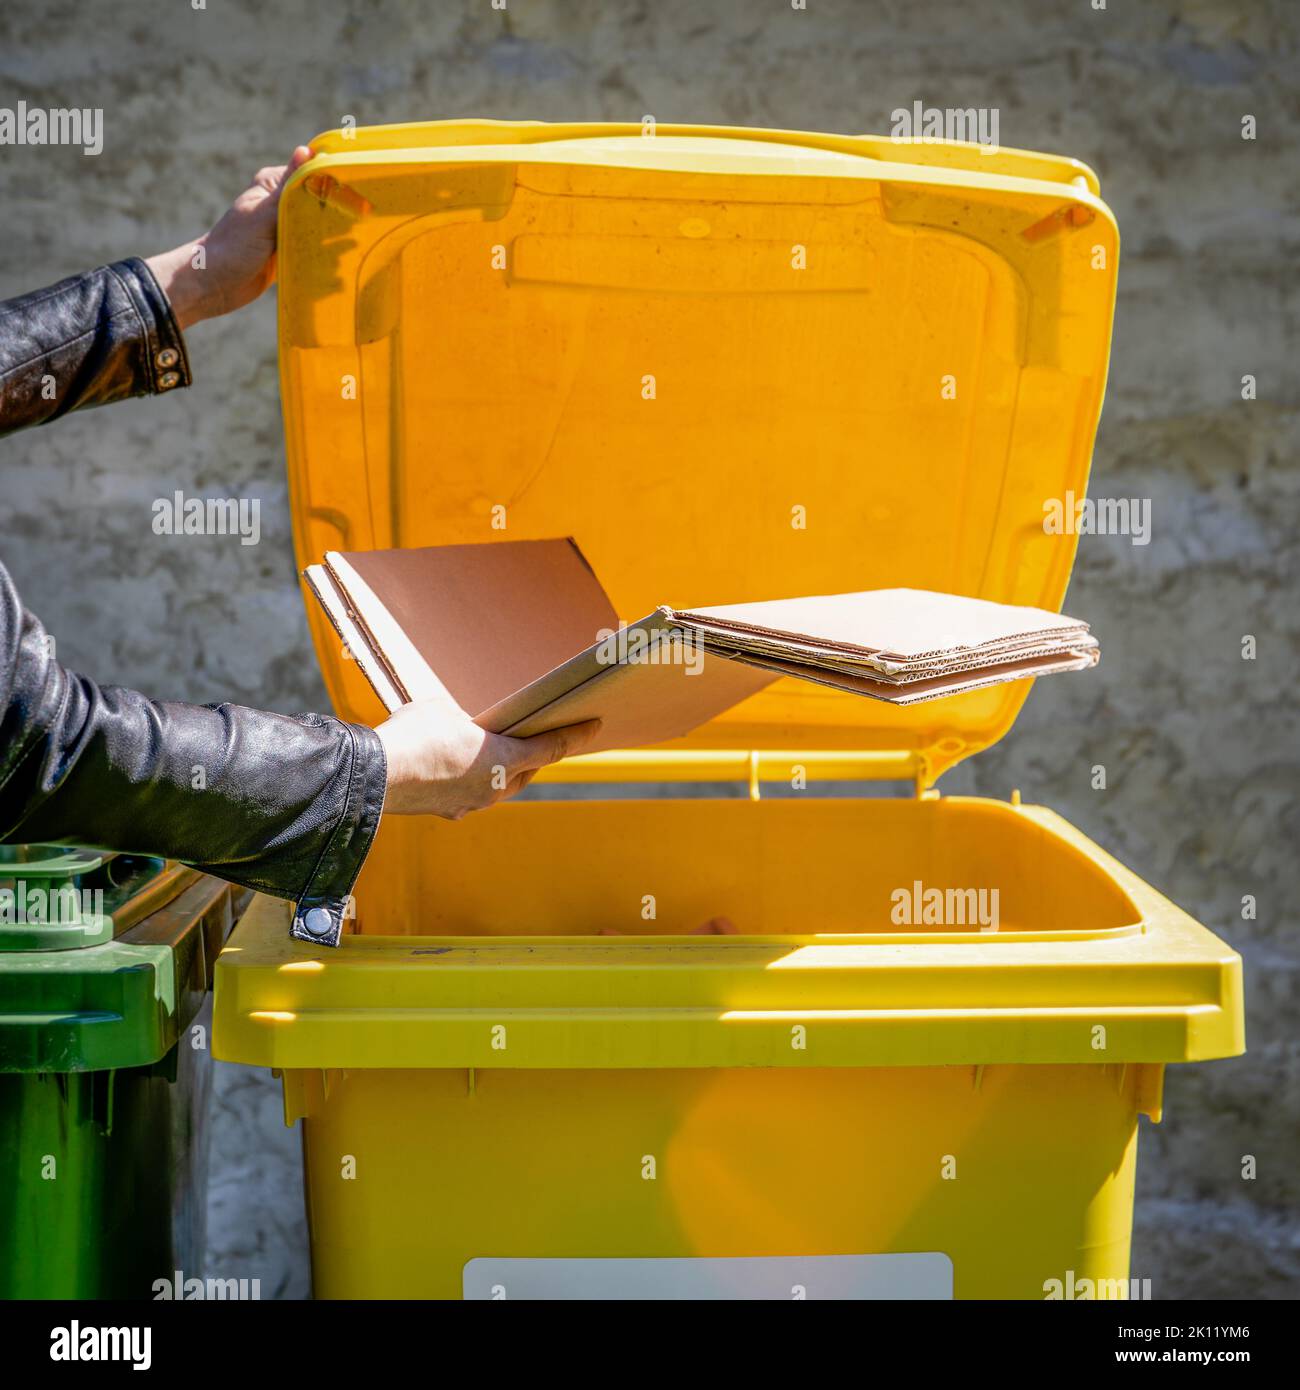 Paper and cardboard sorting container. Environmental cleanliness. Stock Photo